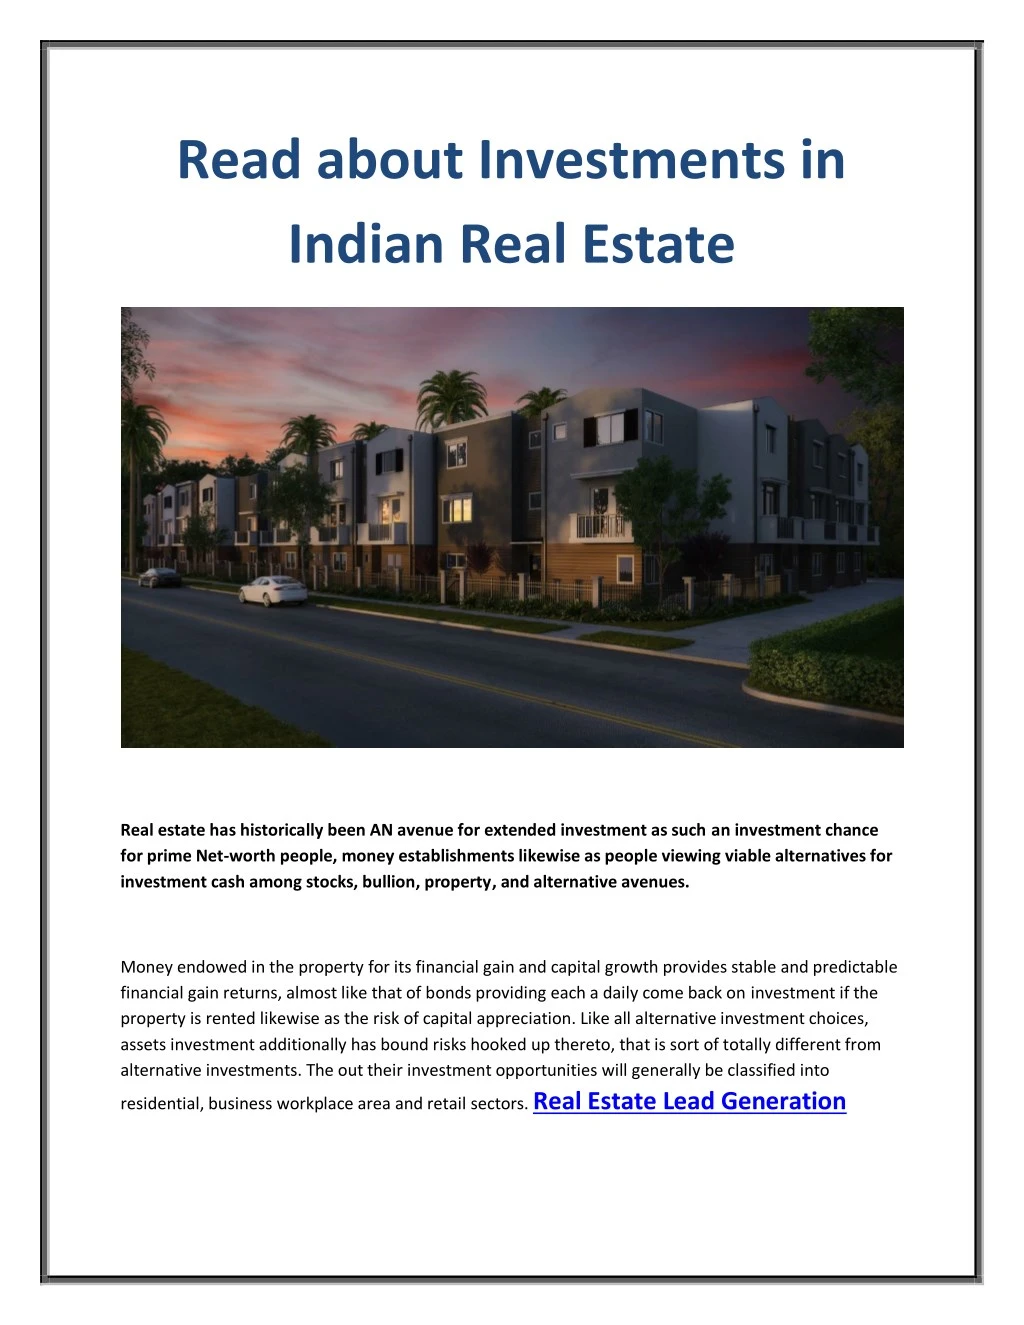 read about investments in indian real estate